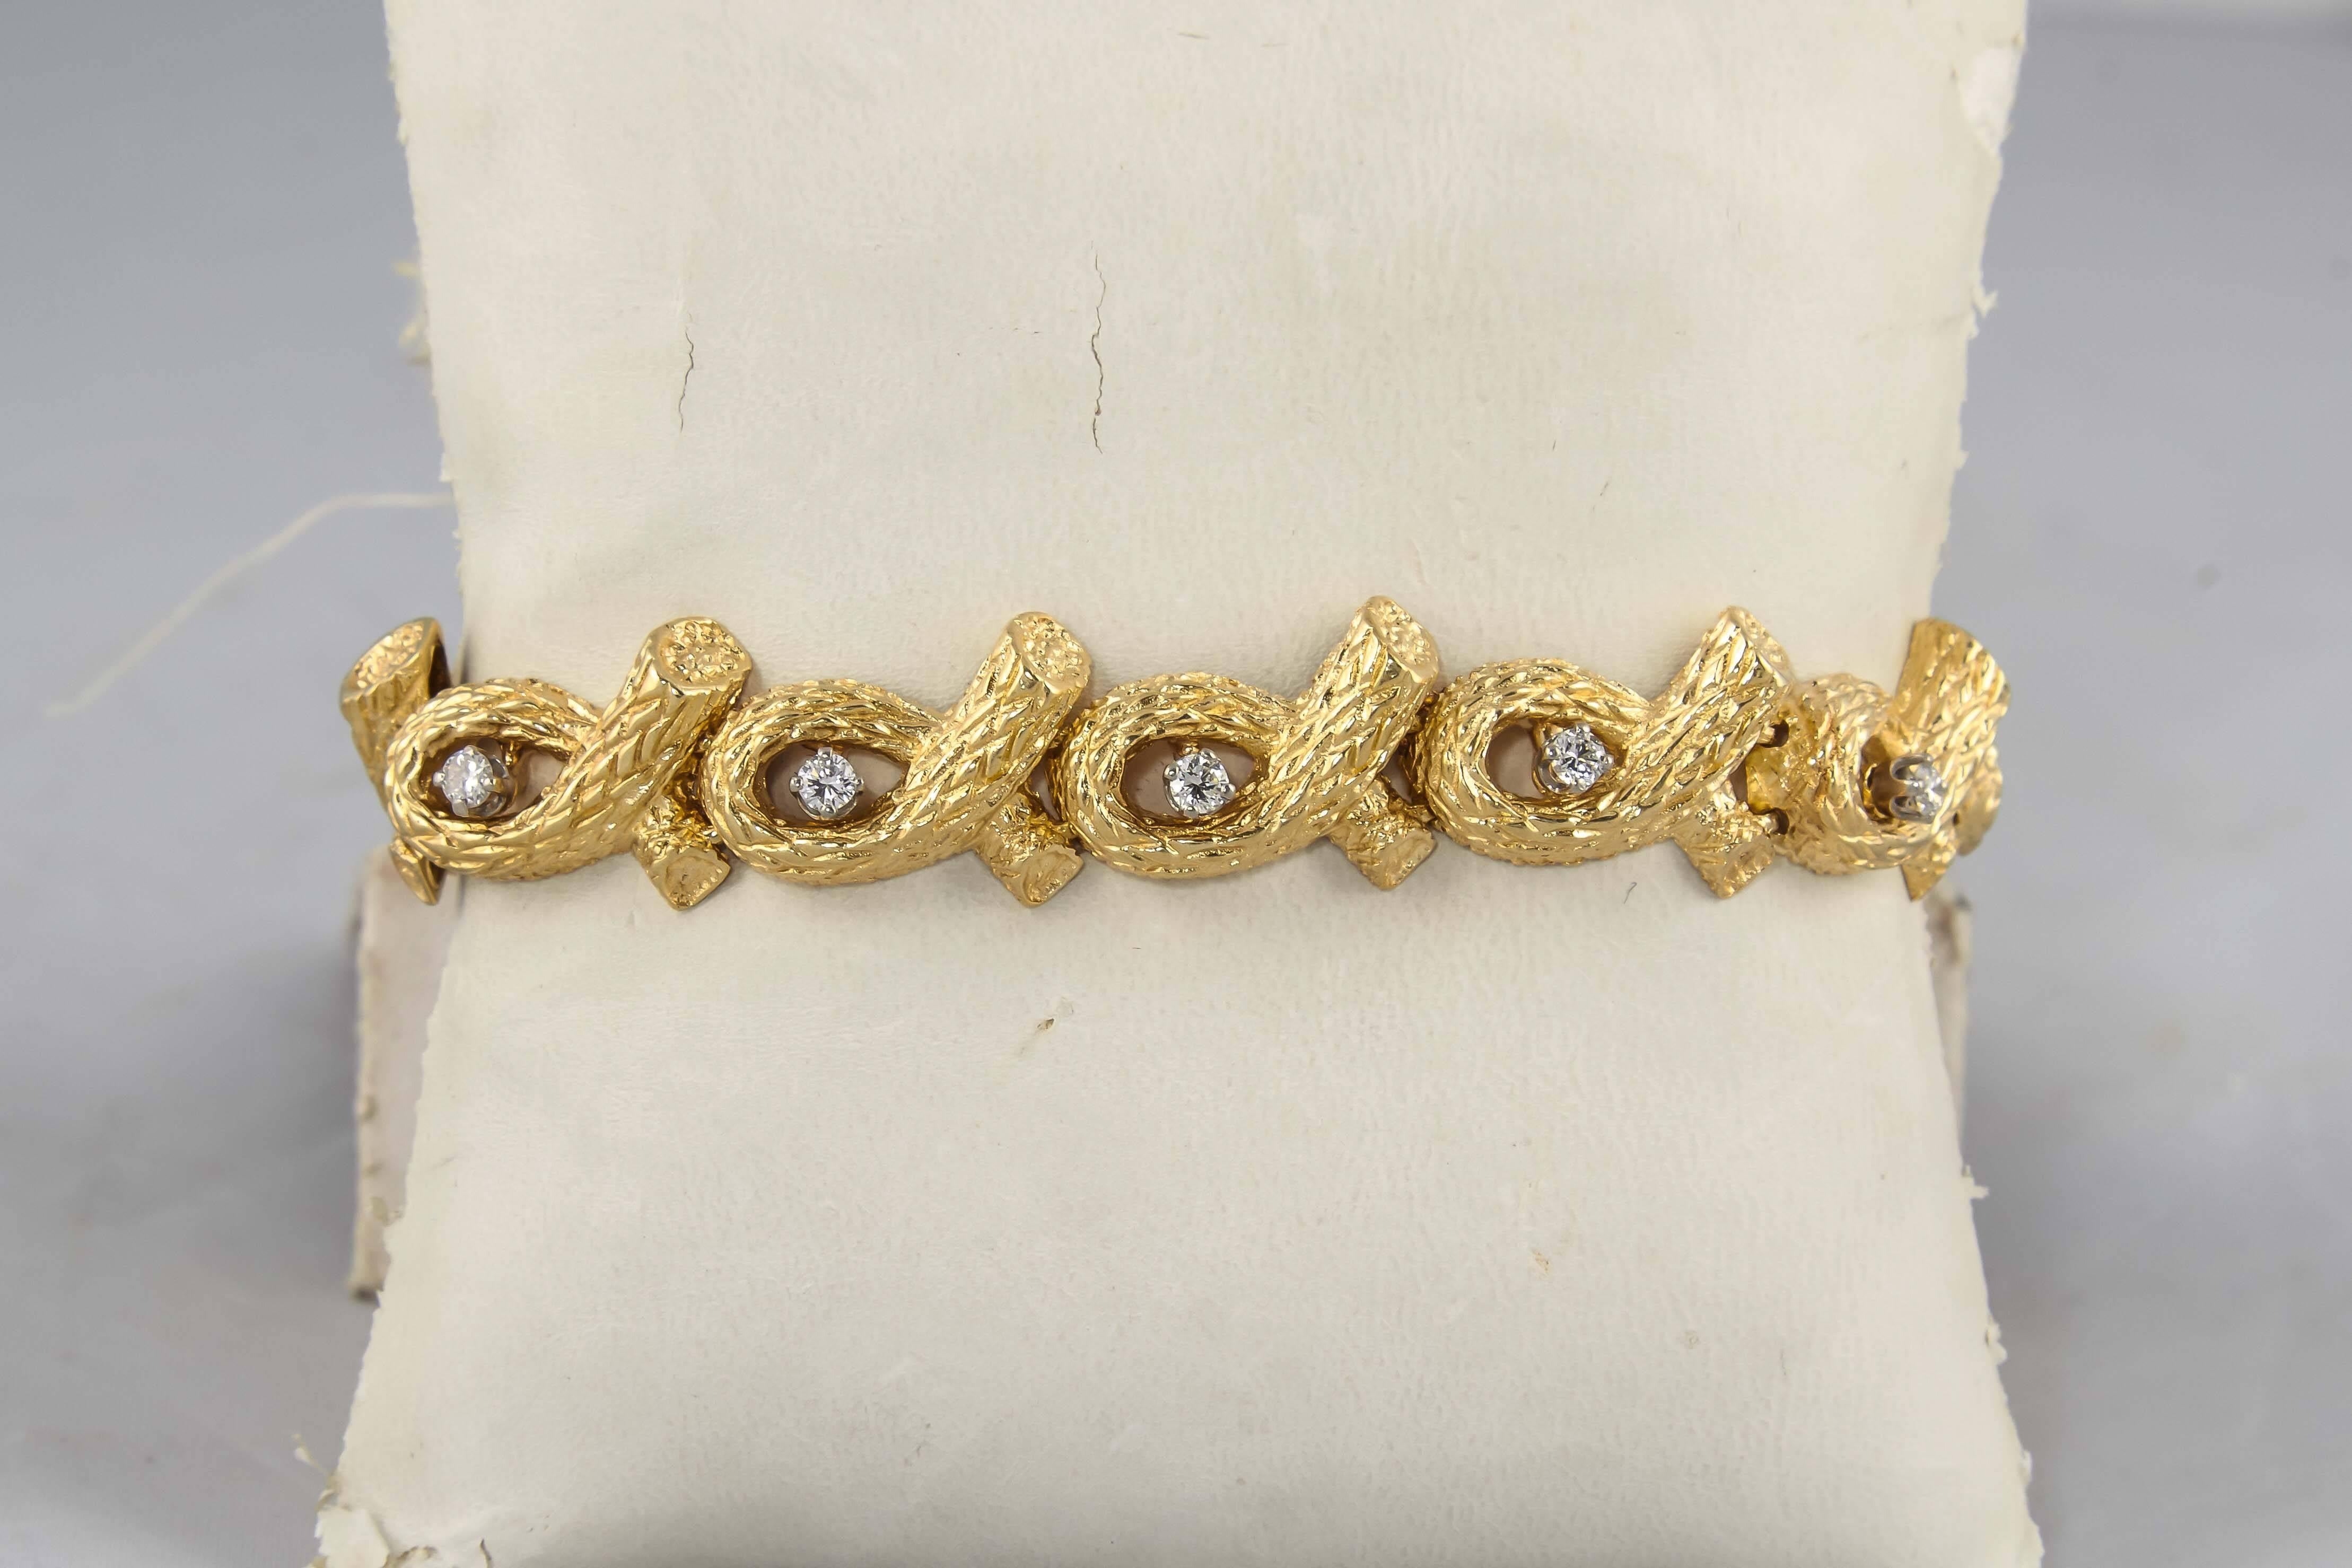 18kt Textured Yellow Gold Open Link Flexible Bracelet Exhibiting A Bamboo Style And Branch Like/Log Design Craftmanship,Embellished With Ten Full Cut High Quality Diamonds Weighing Approximately 1.10 Total Carat Weight.Designed In The 1960's By